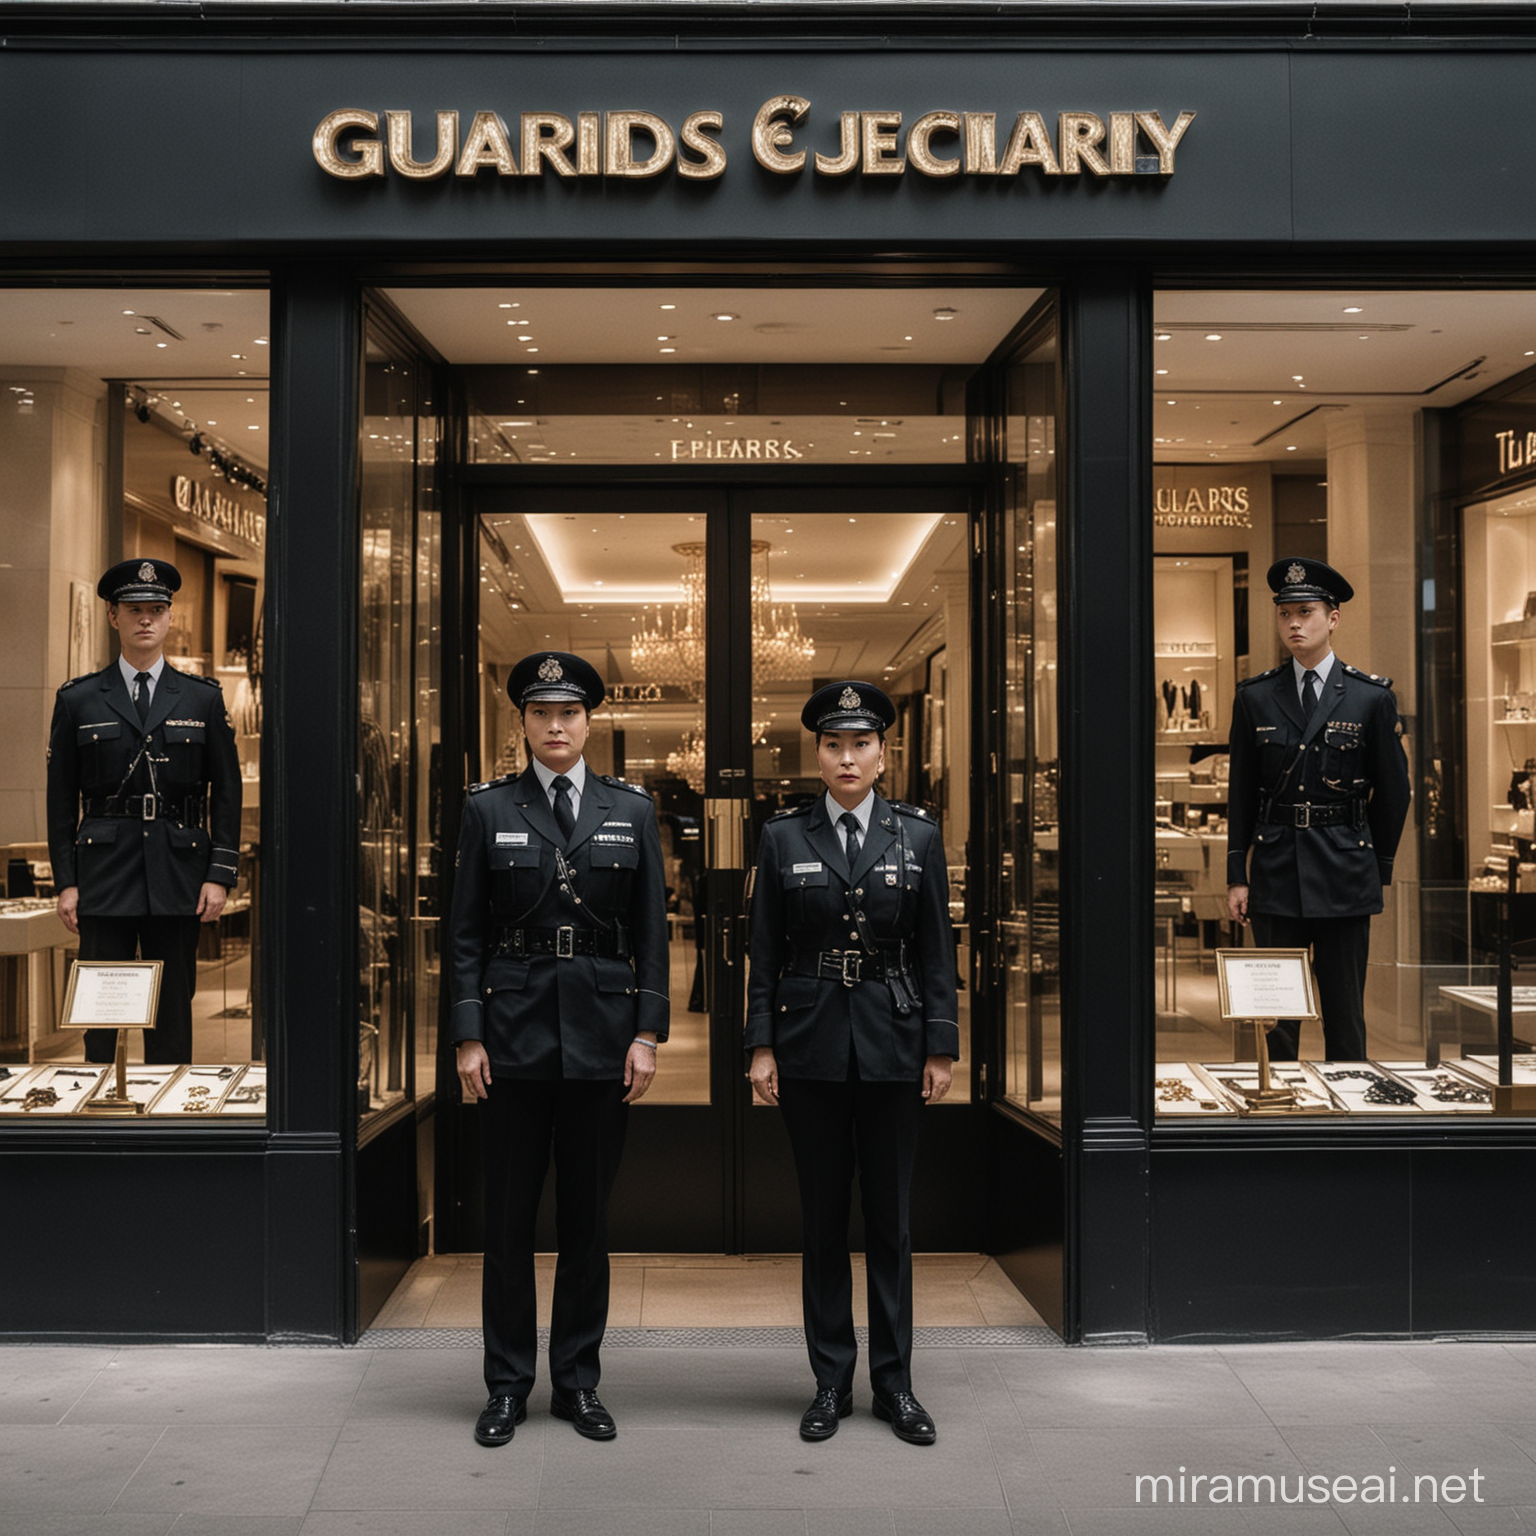 Burly Security Guards Protecting LISE PARK Jewelry Store